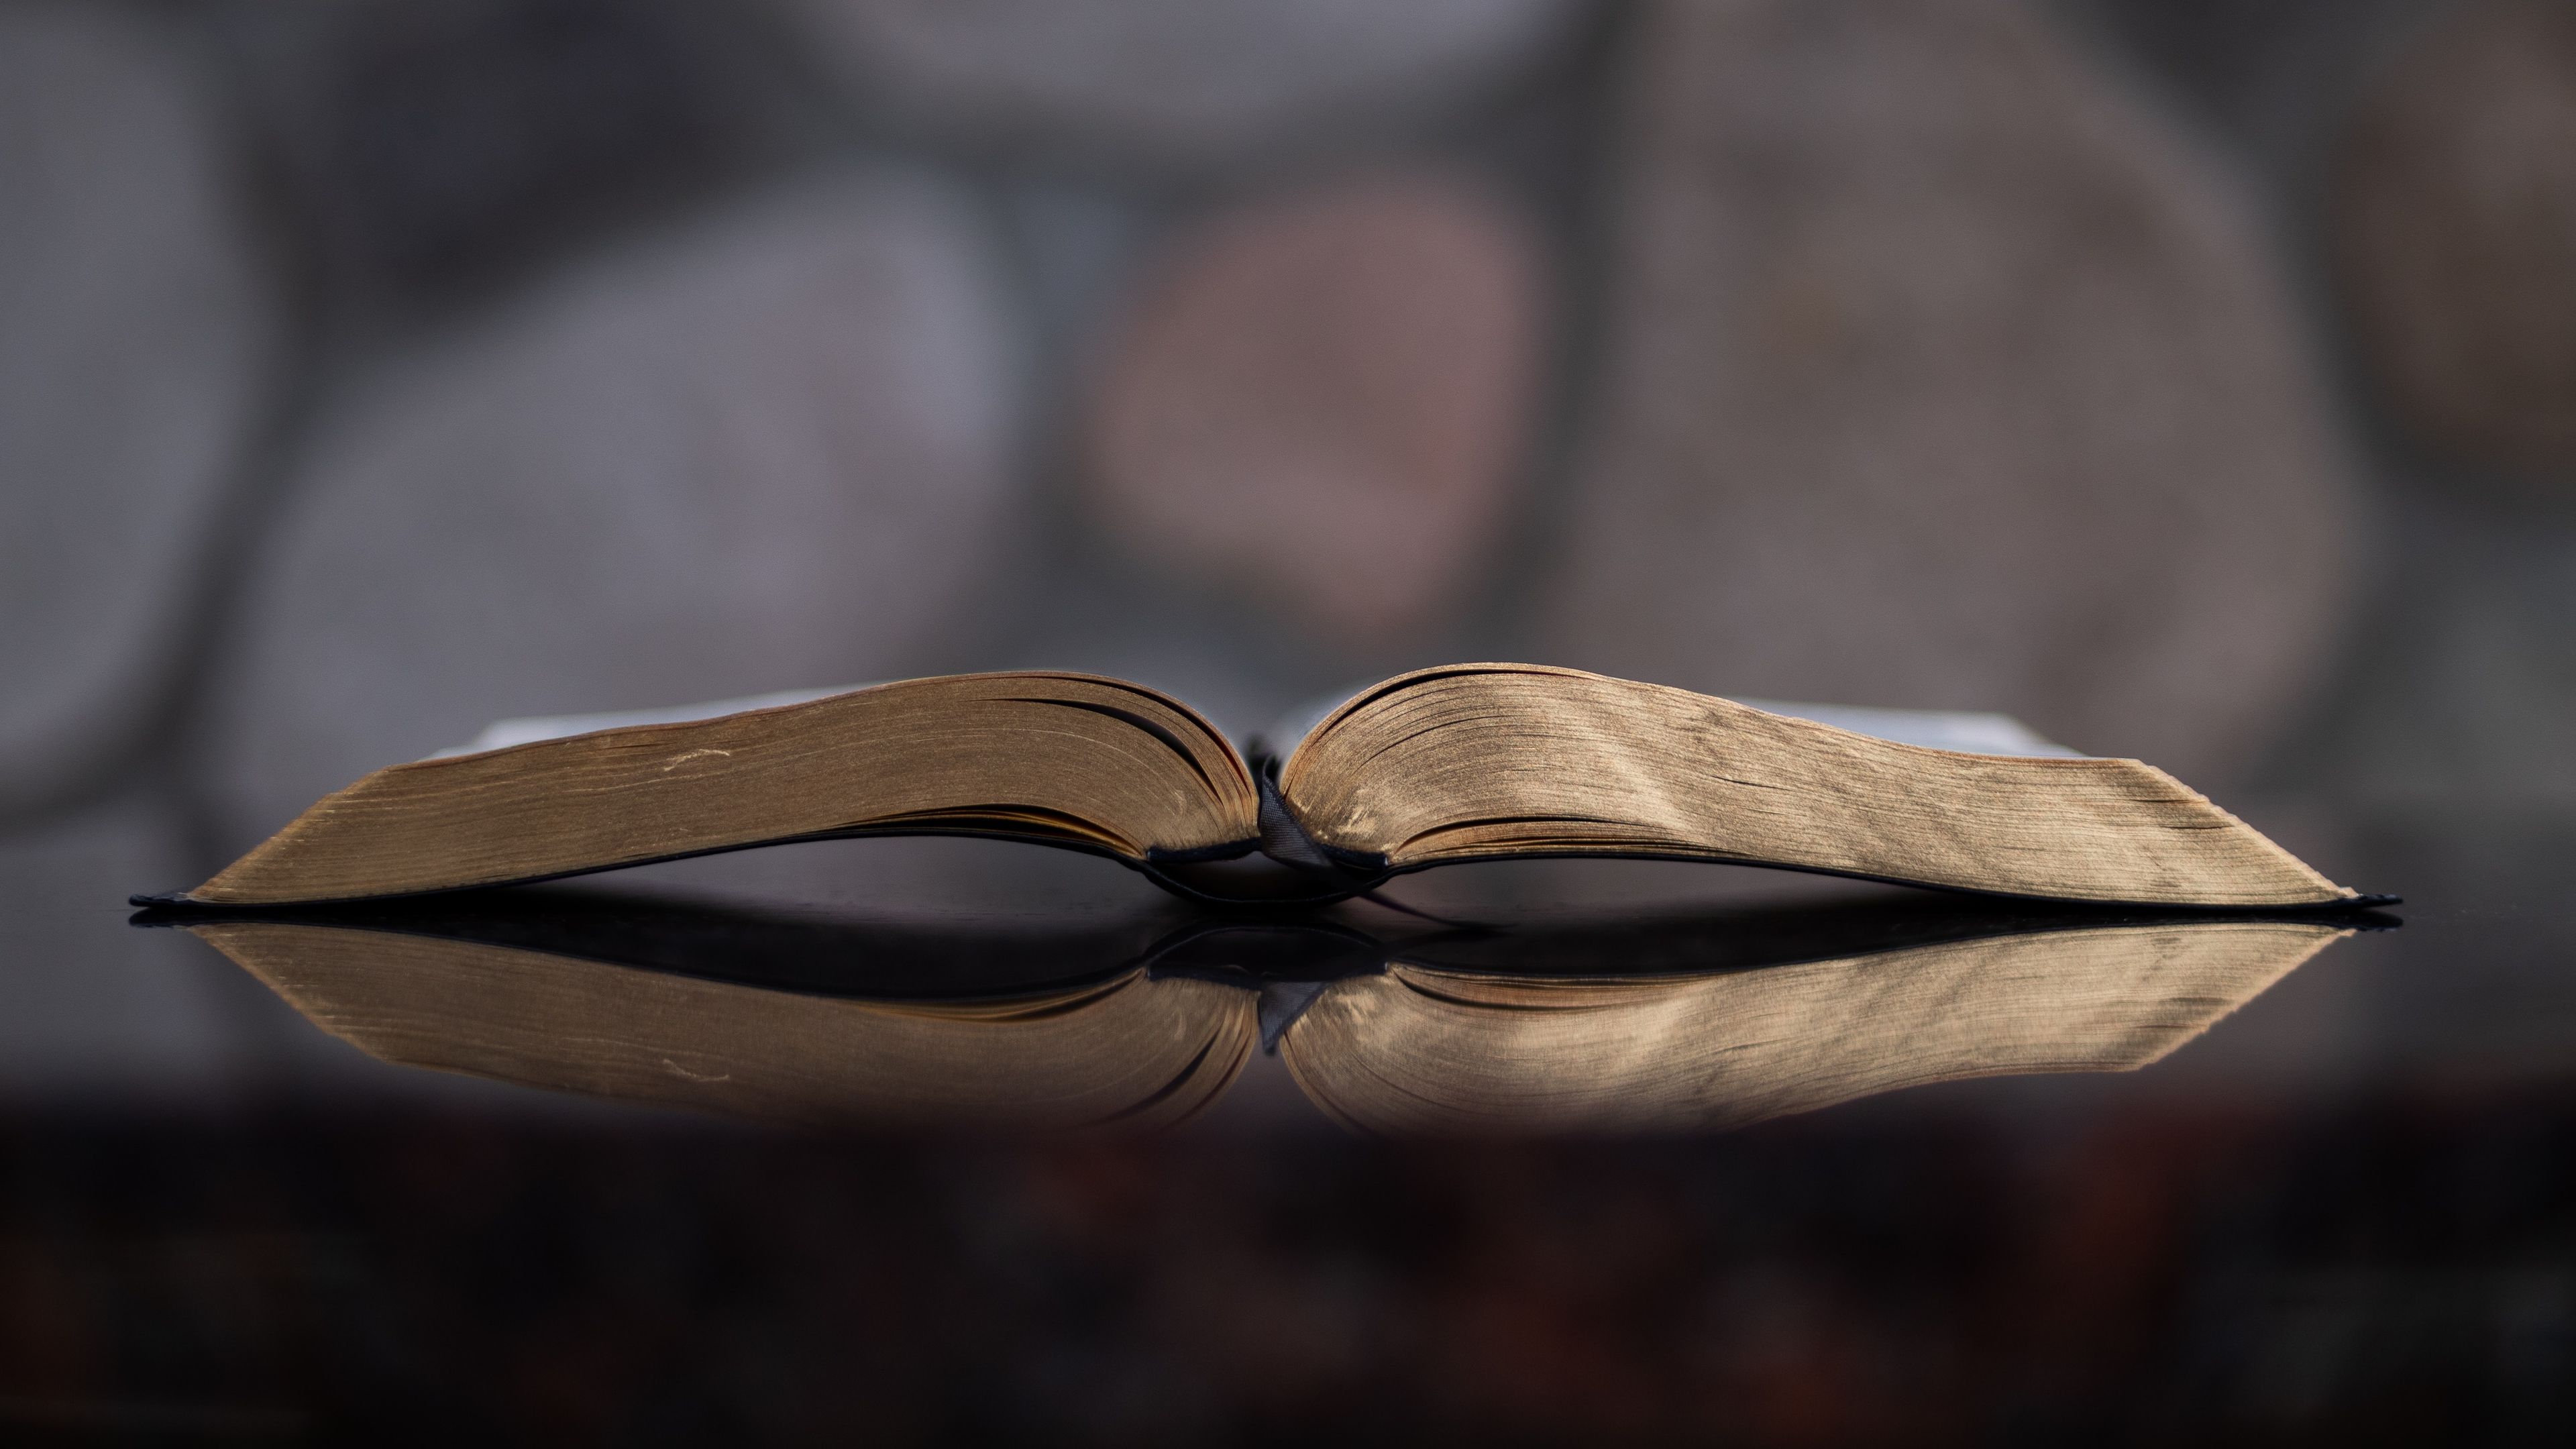 An bible left open on a table with a blurred background